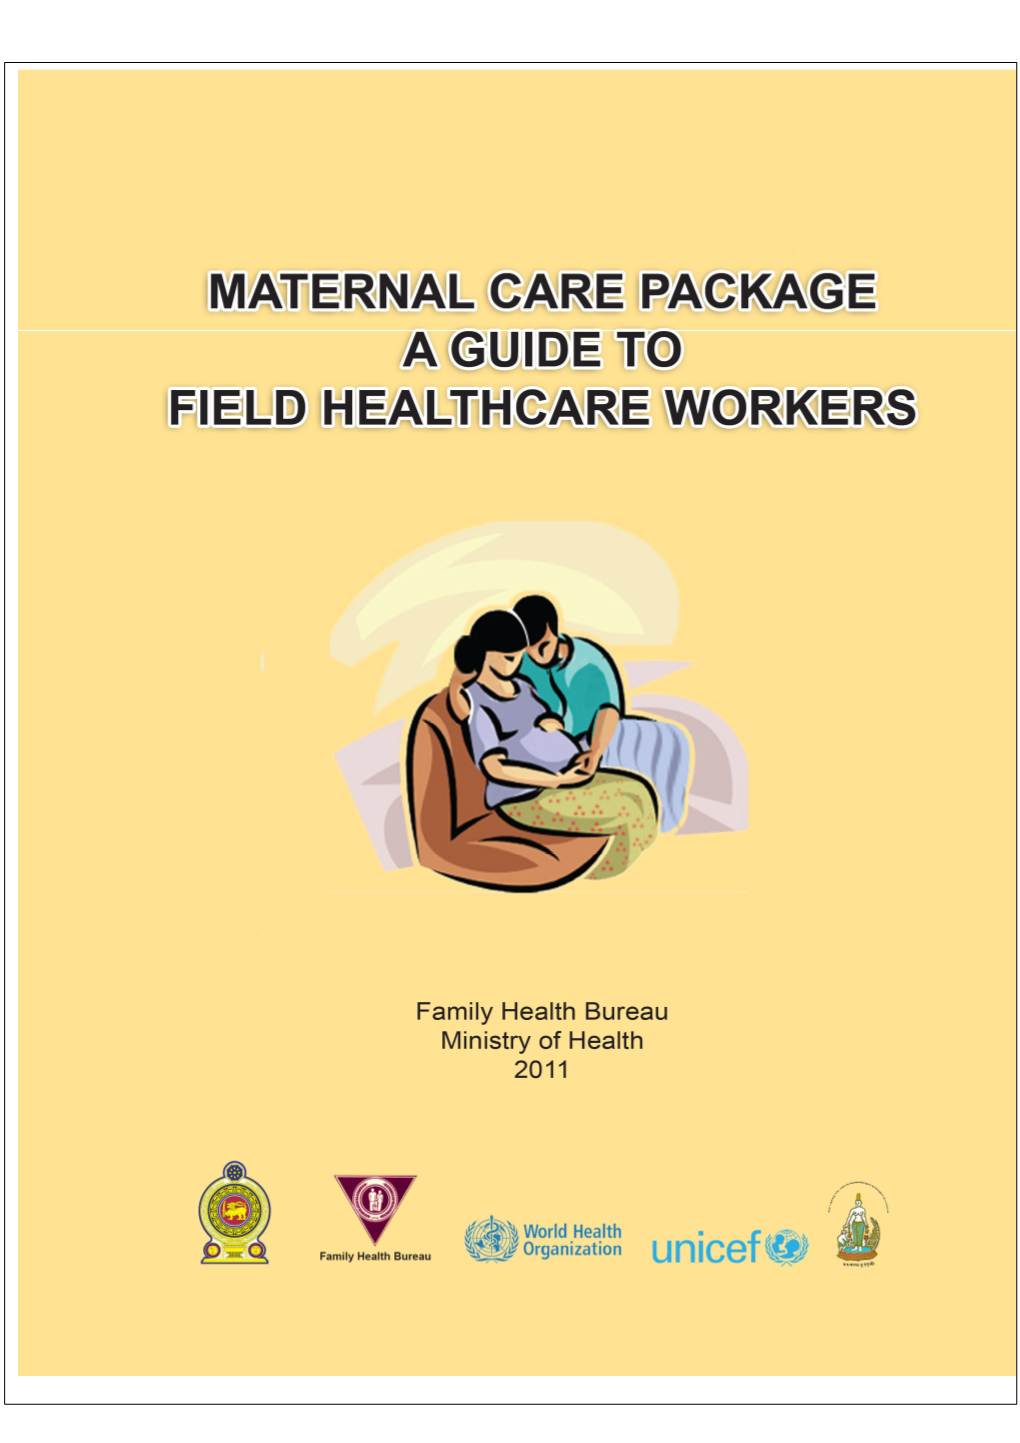 Maternal Care Package a Guide to Field Healthcare Workers